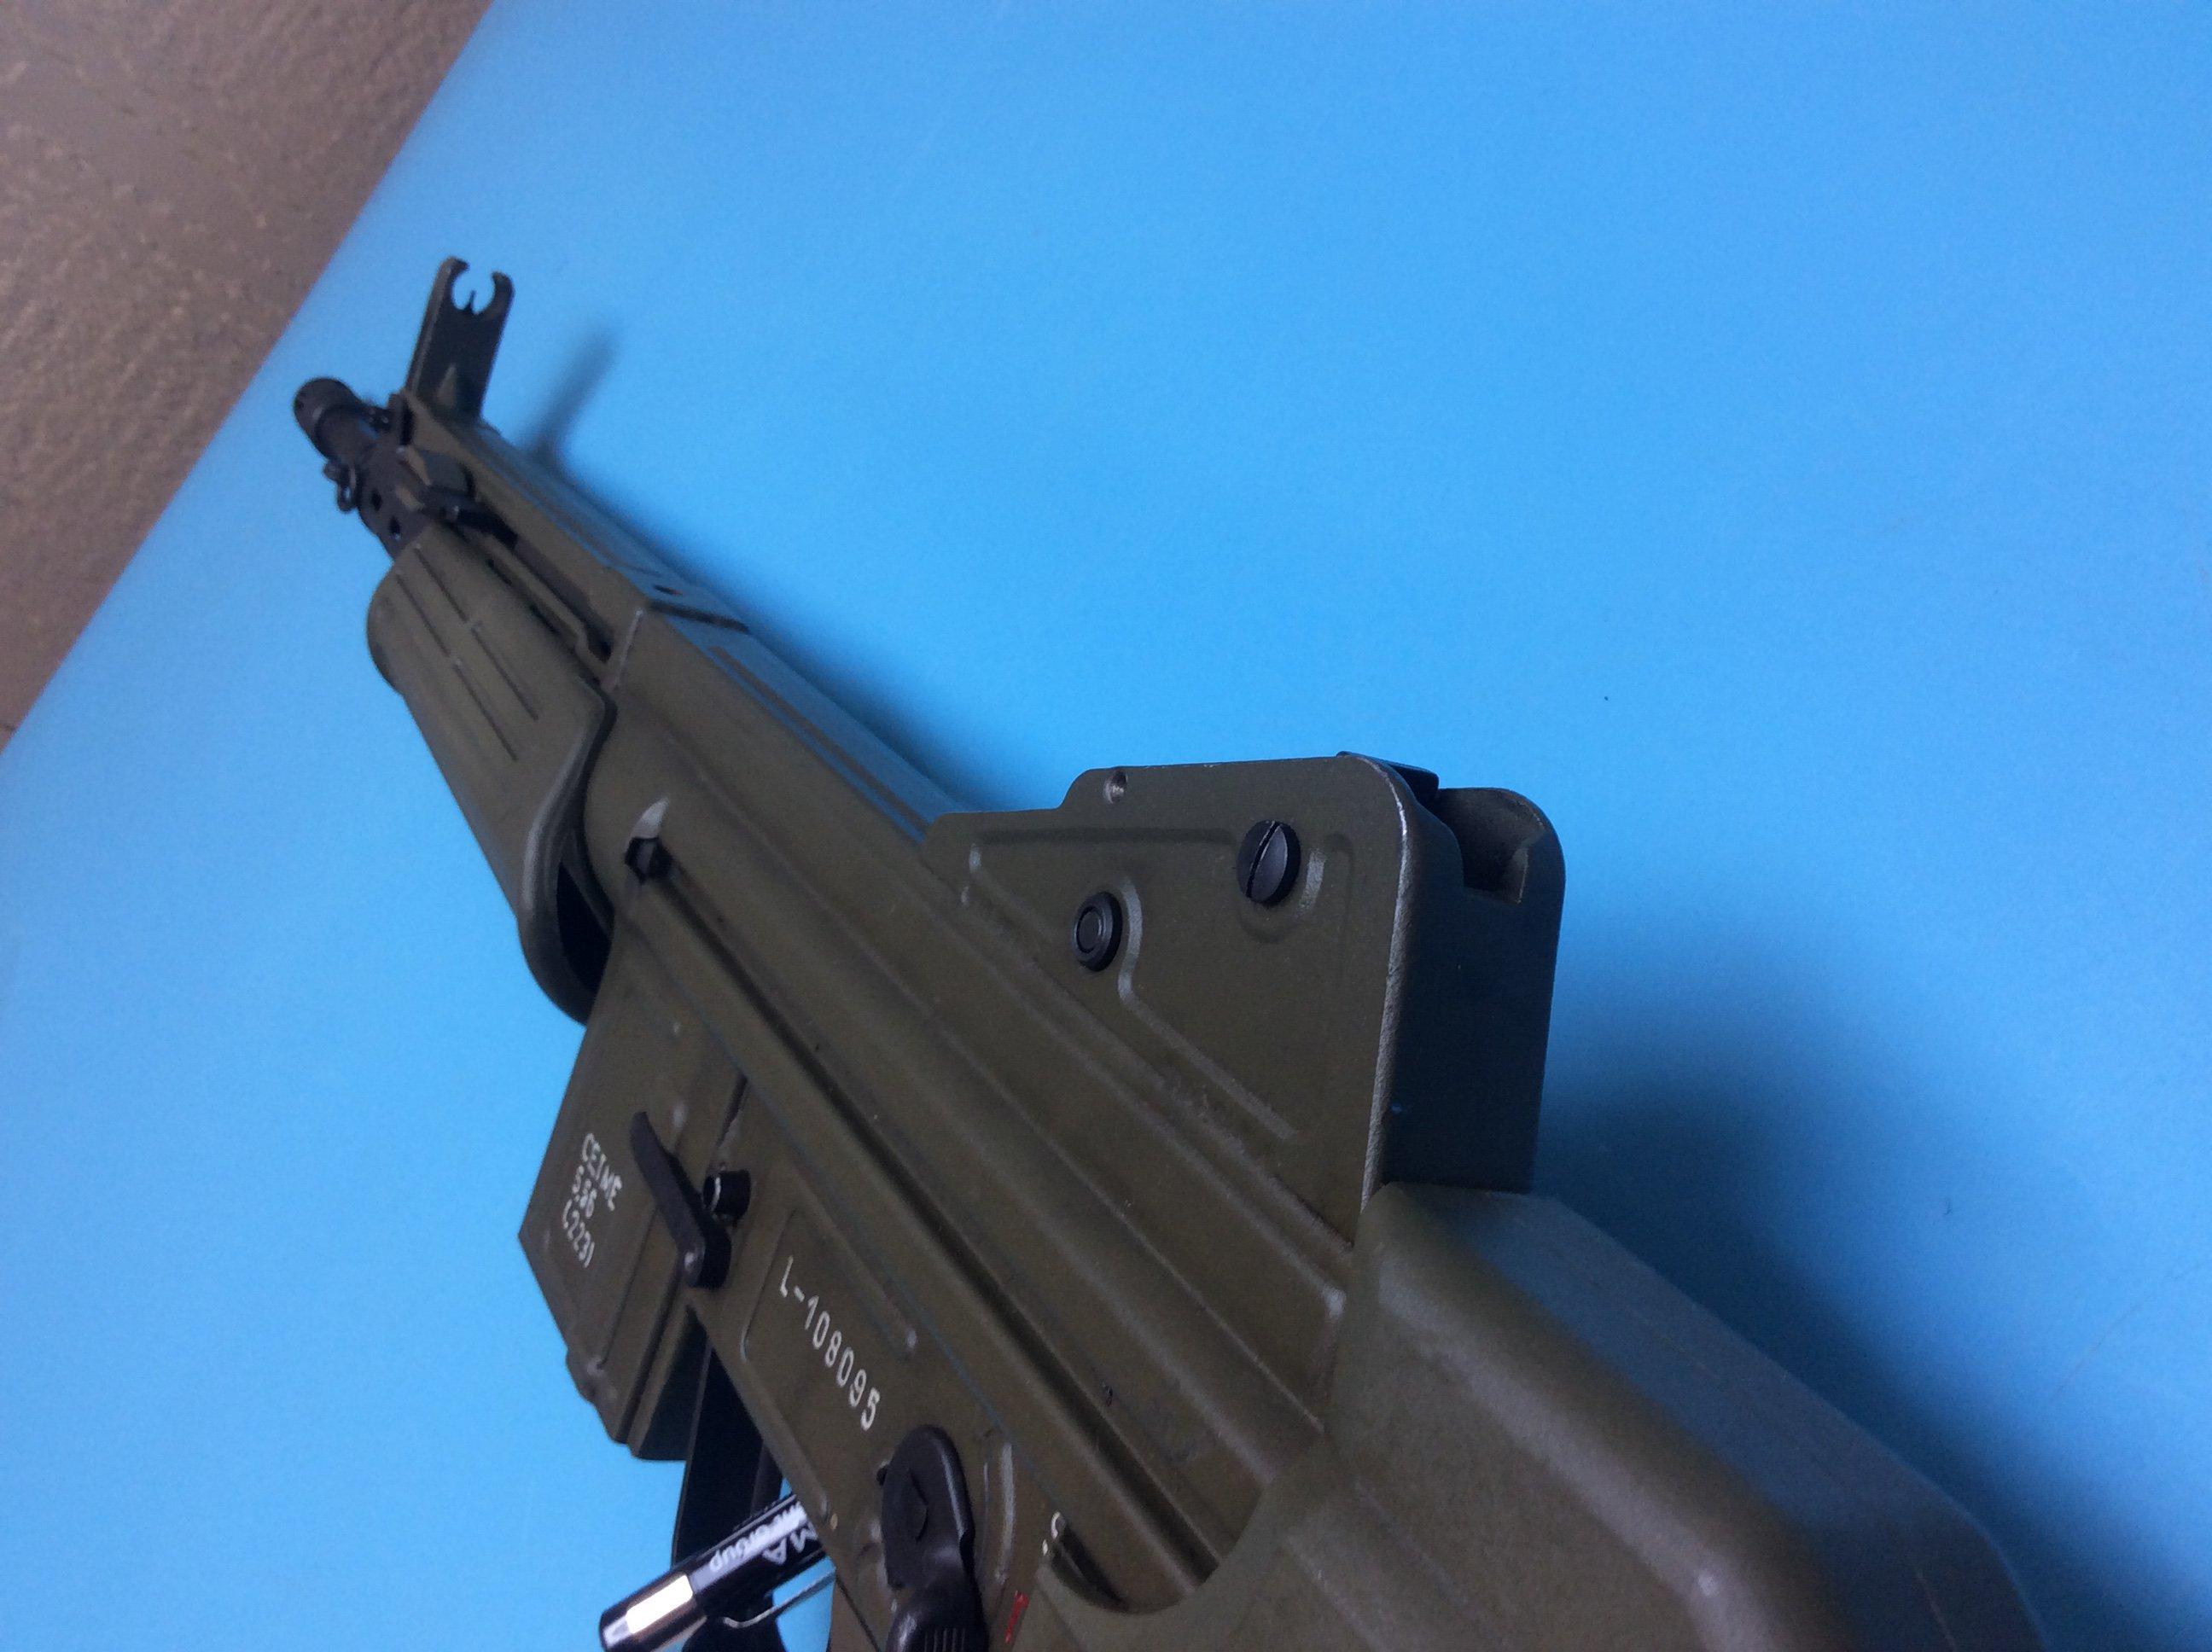 C.A.I/CETNE Fully Automatic Rifle 5.56/223 caliber with an army green finis